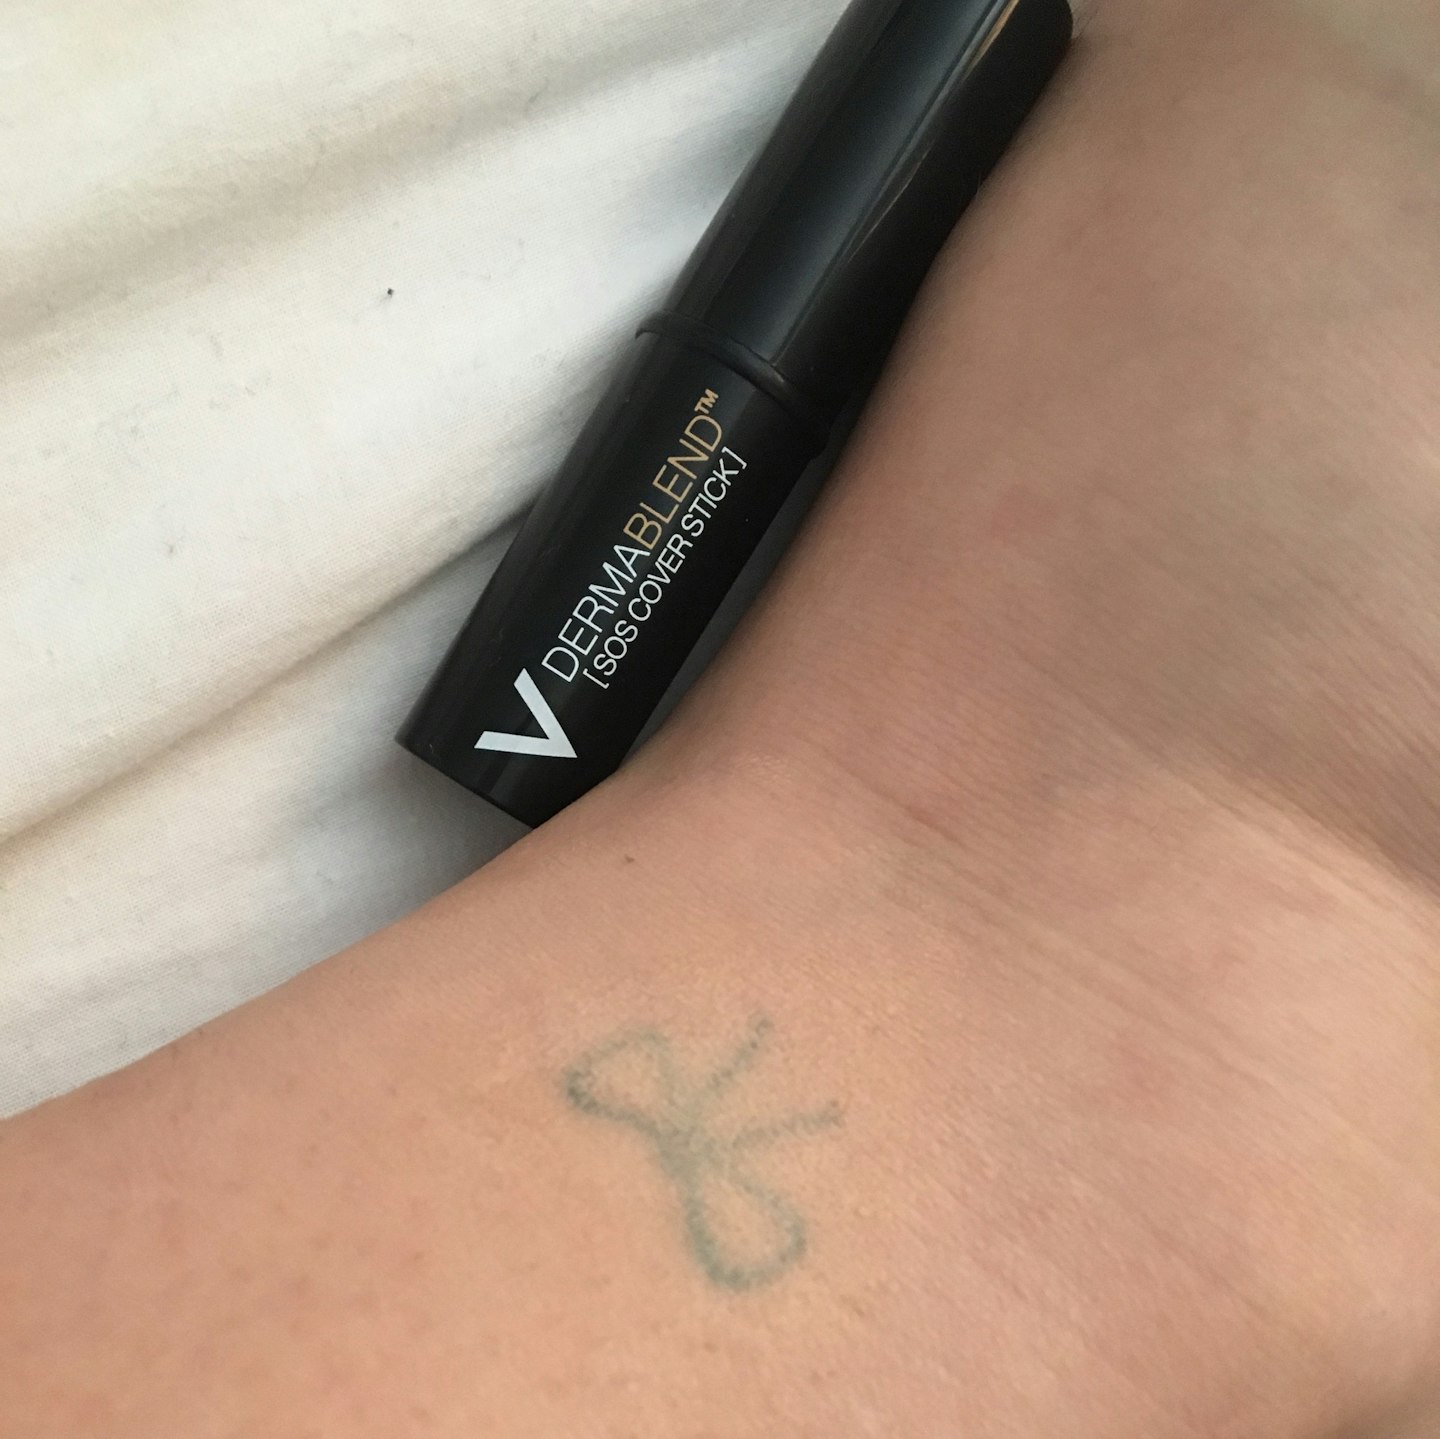 Testing Concealers To Cover Tattoo